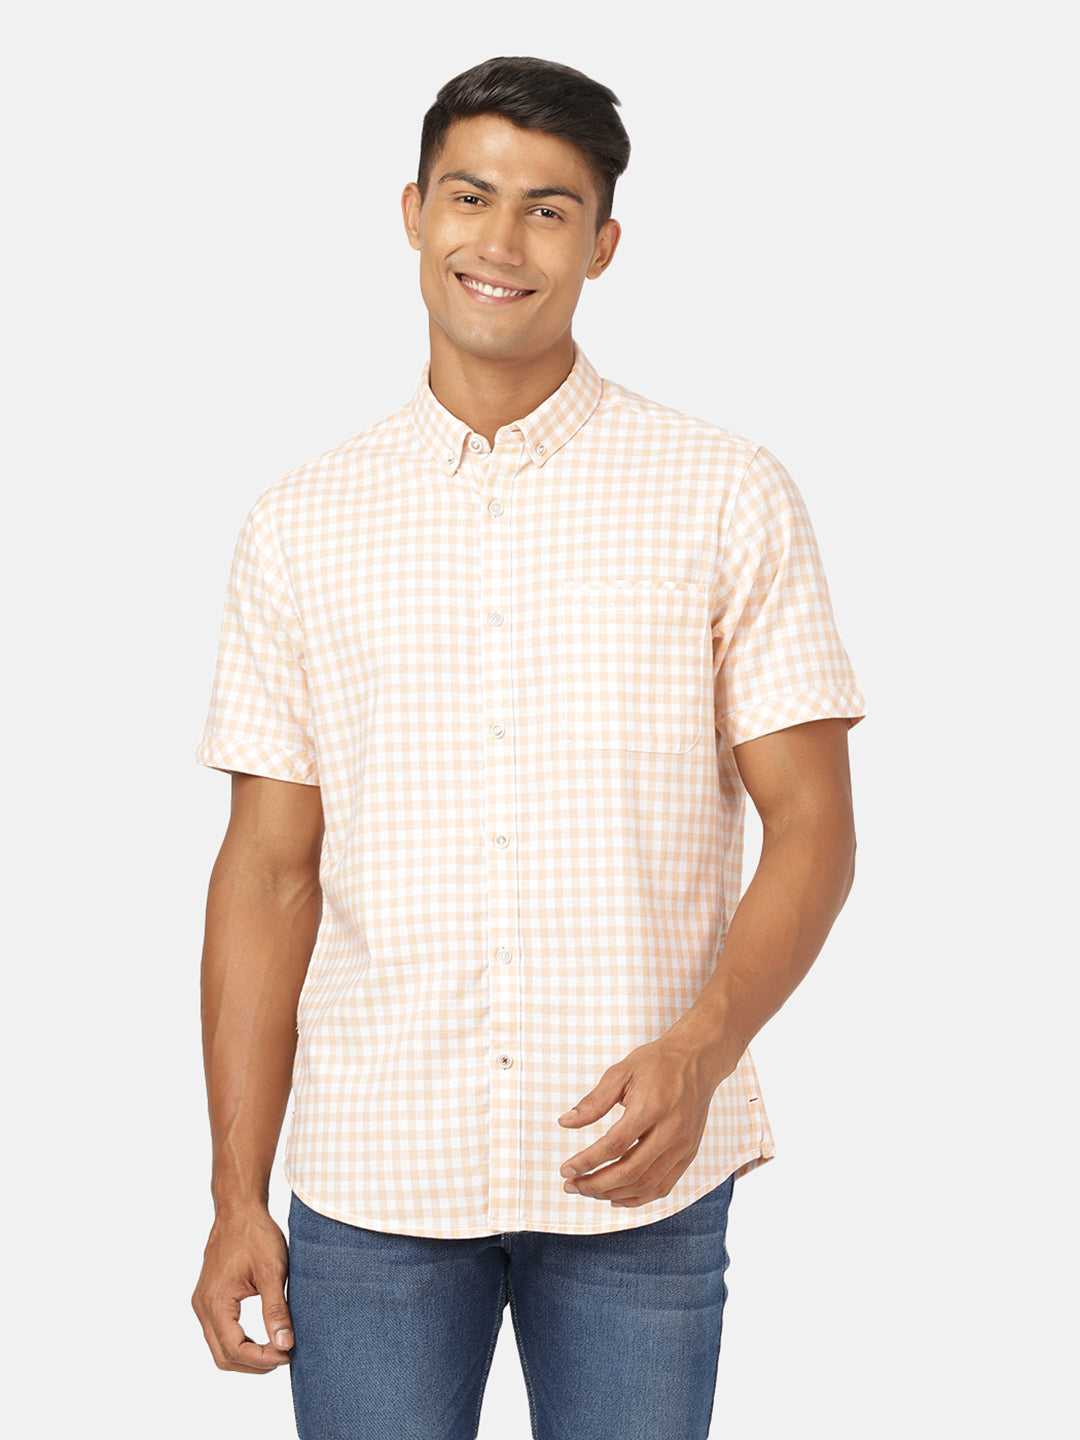 Casual Half Sleeve Comfort Fit Checks Orange with Collar Shirt for Men